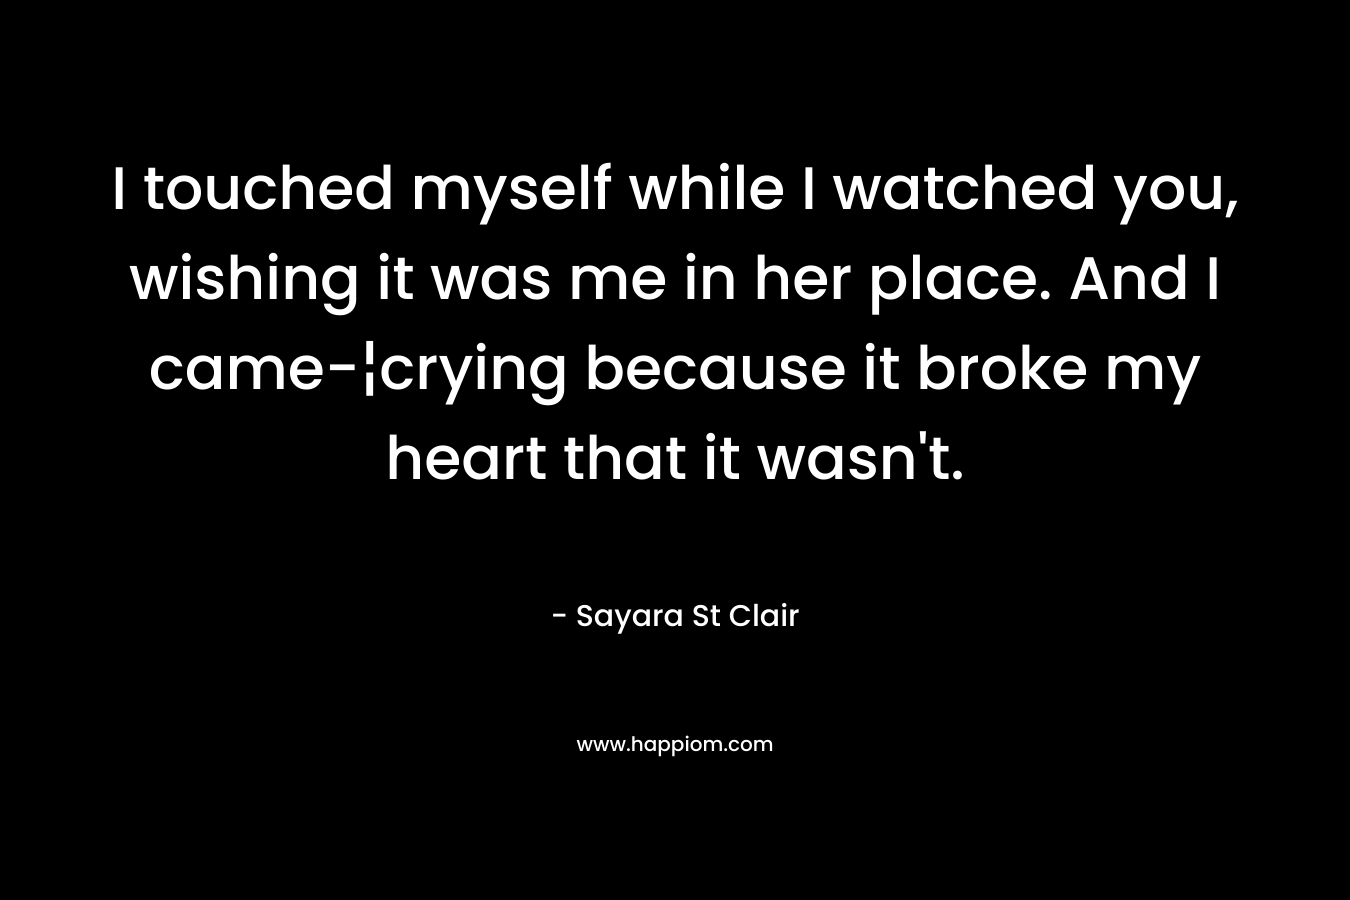 I touched myself while I watched you, wishing it was me in her place. And I came-¦crying because it broke my heart that it wasn’t. – Sayara St Clair